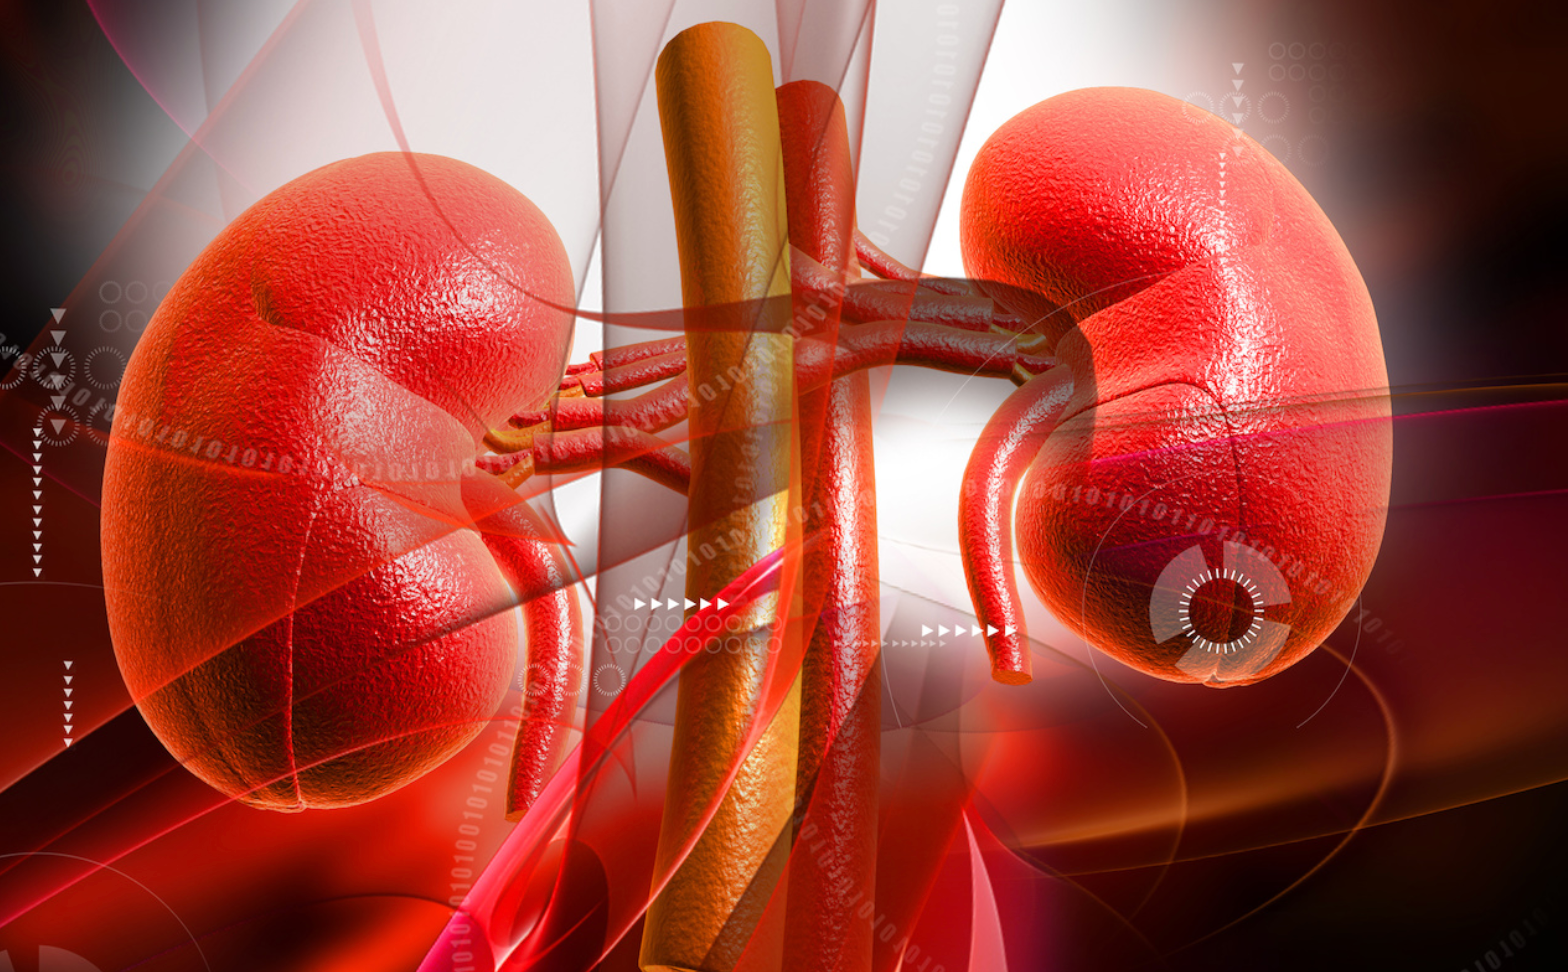 Study Finds RAS Inhibition Has Little Effect on Outcomes in Advanced Chronic Kidney Disease